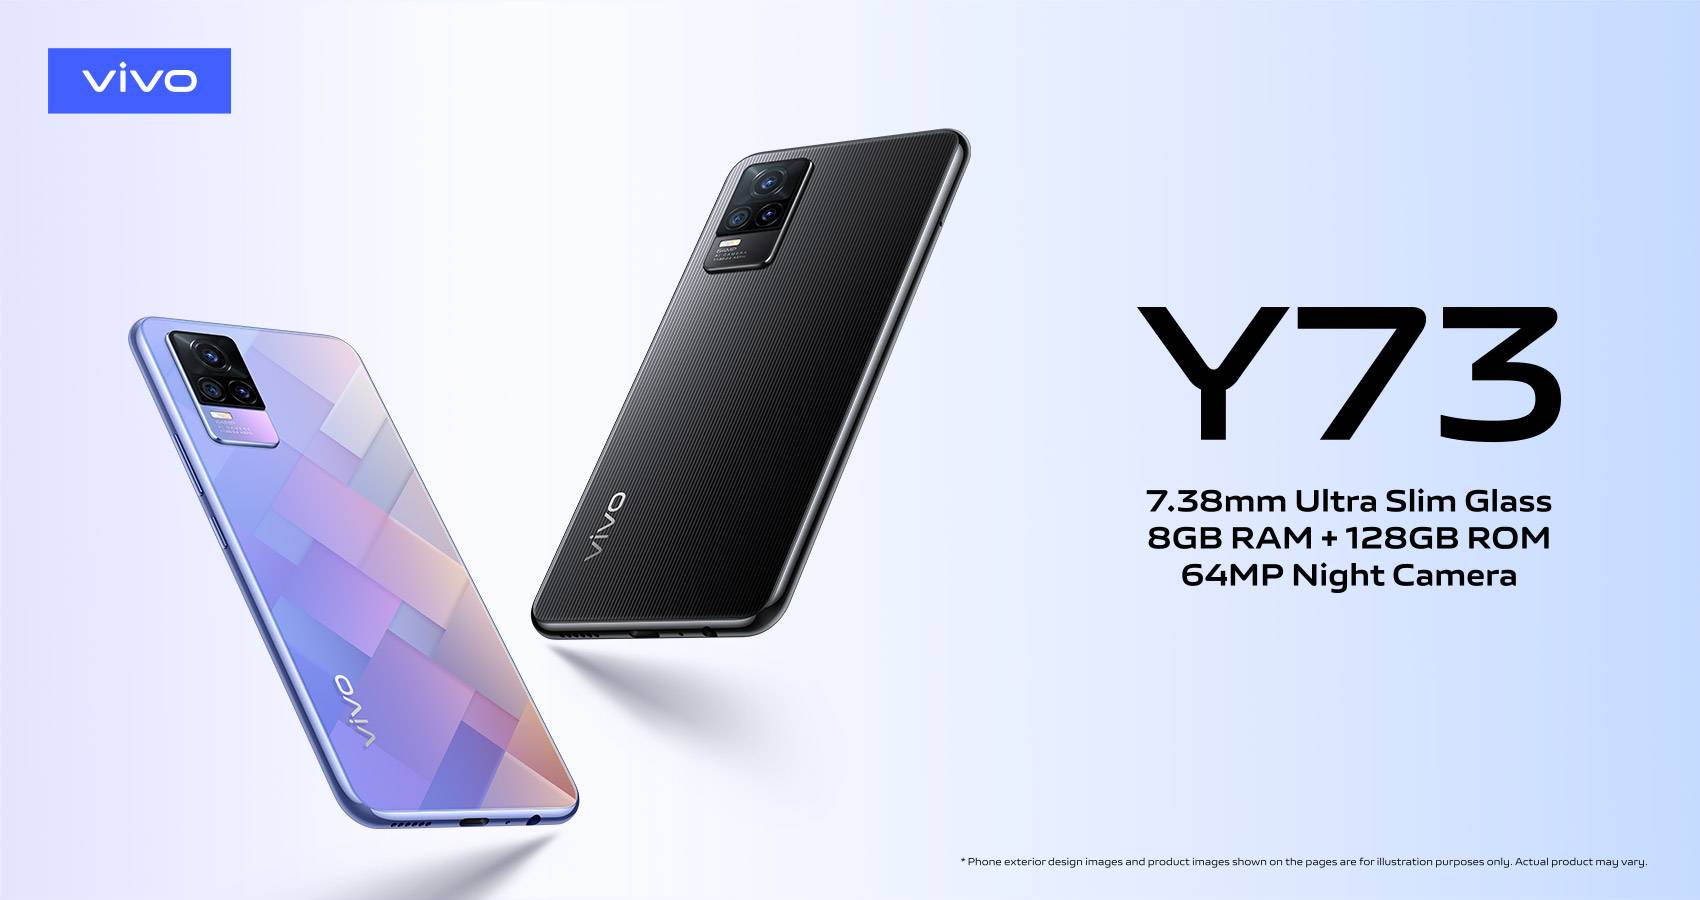 New Powerful vivo Y73 with Sleek Design and 64MP AF  Camera Available in Pakistan